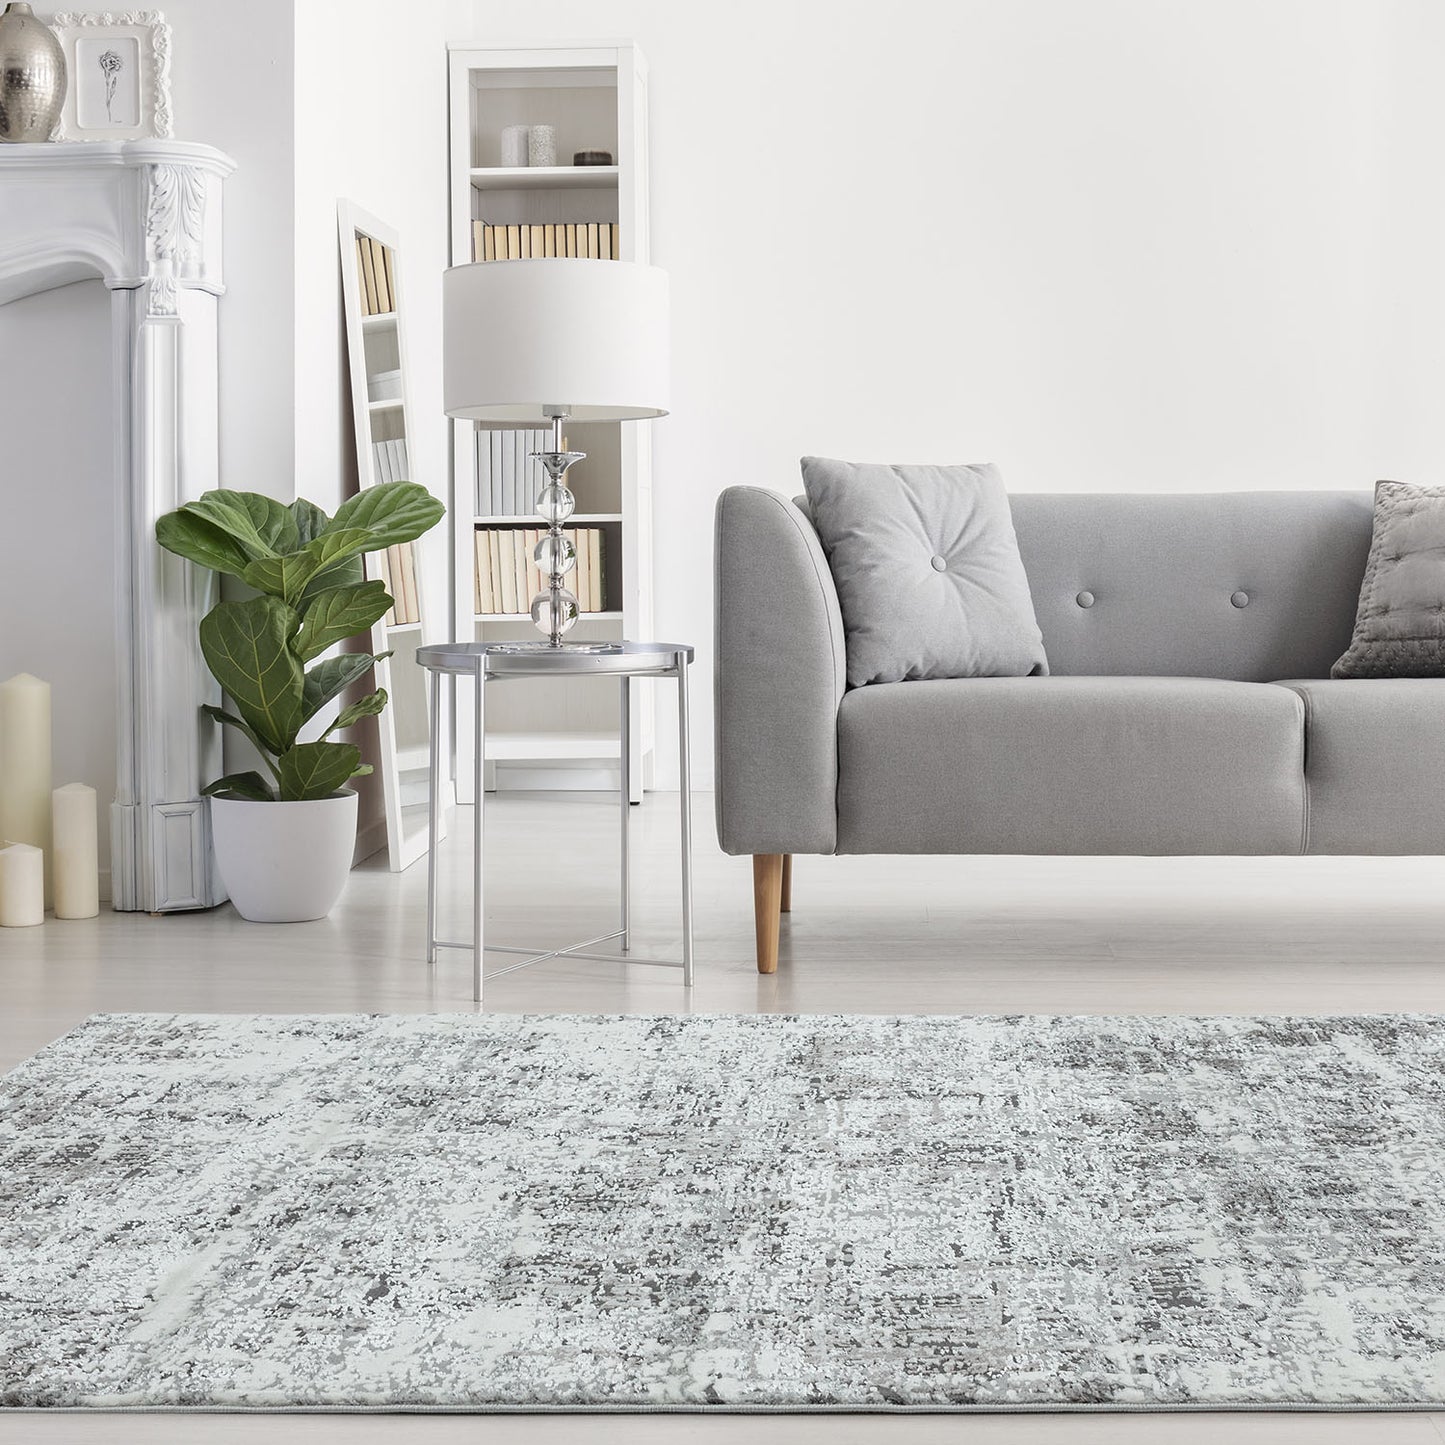 Orion OR05 Abstract Silver Rug